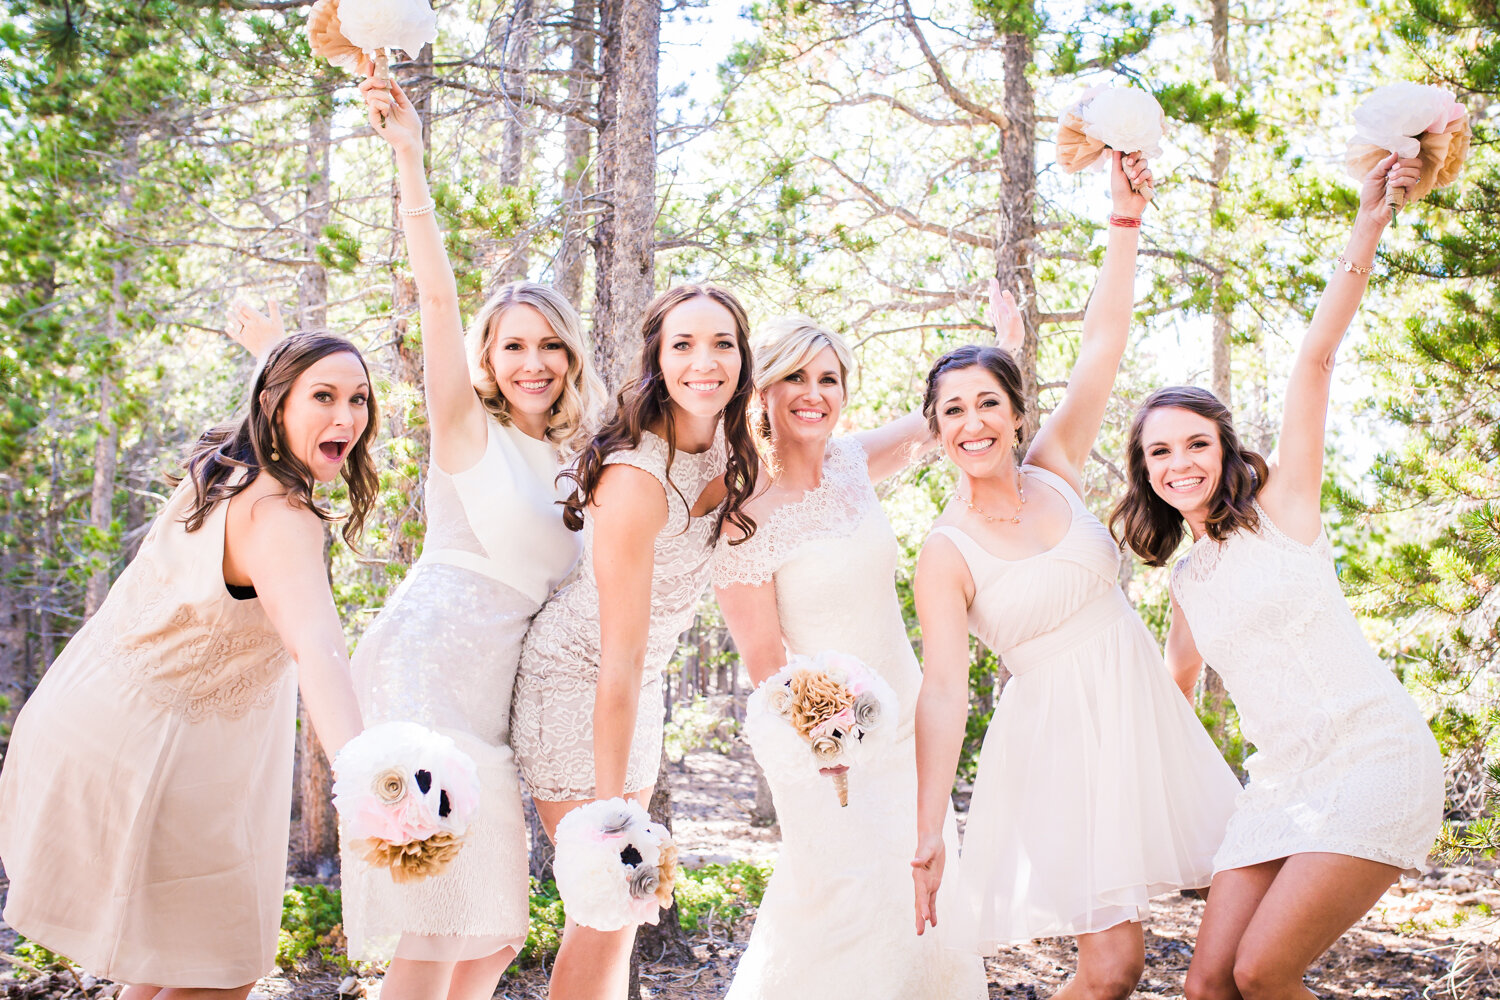  Bridesmaids for a day, best friends for life.&nbsp; 